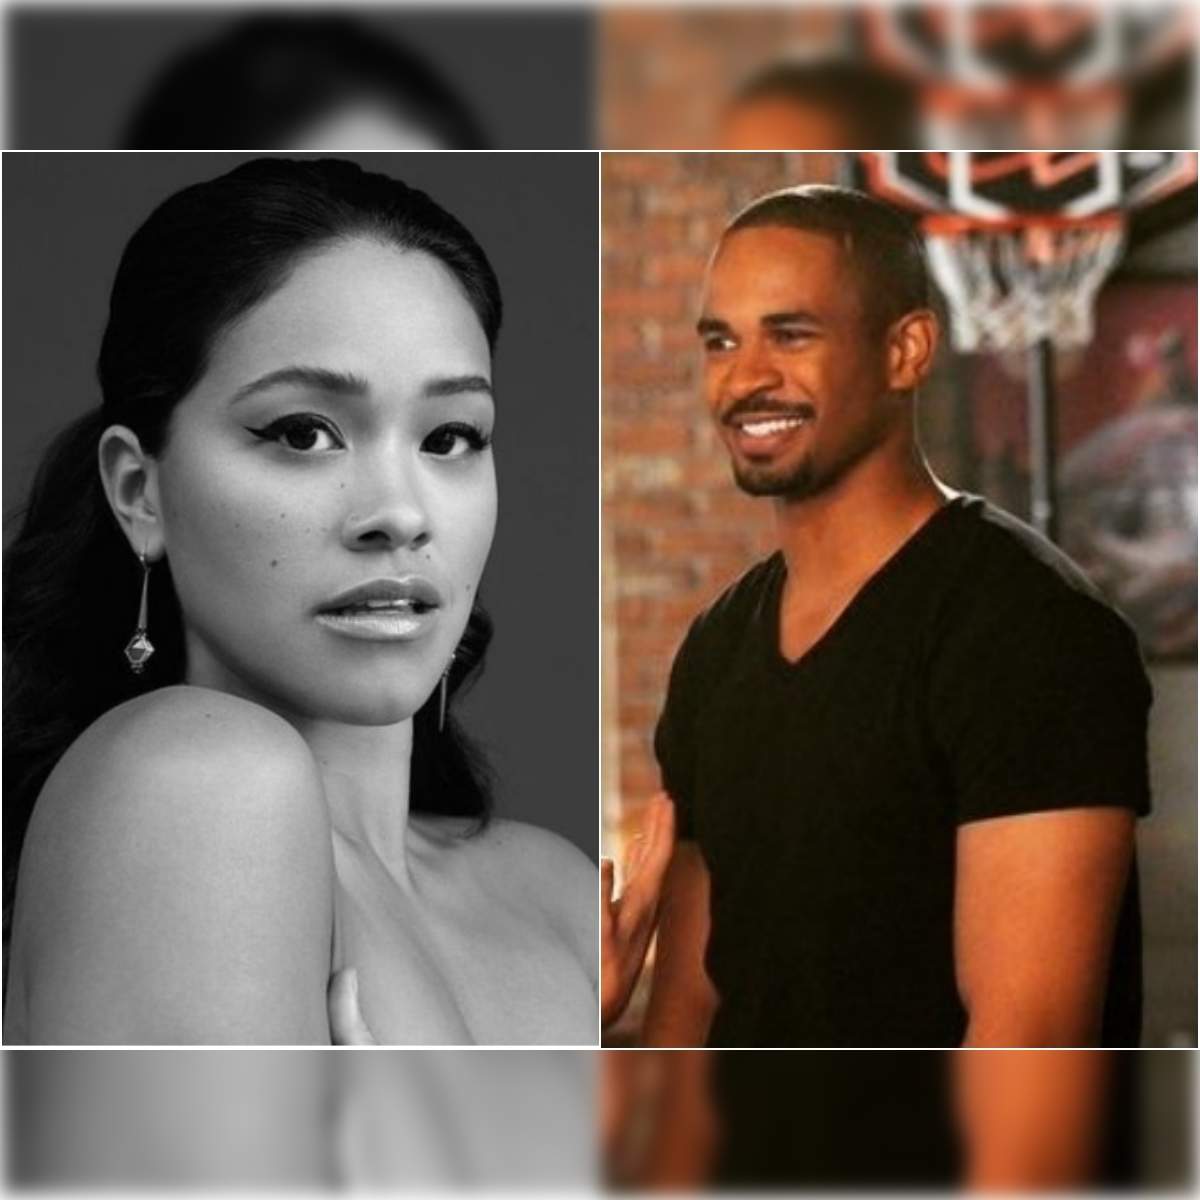 Gina Rodriguez, Damon Wayans Jr. to Star in Netflix Rom-Com 'Players' – The  Hollywood Reporter